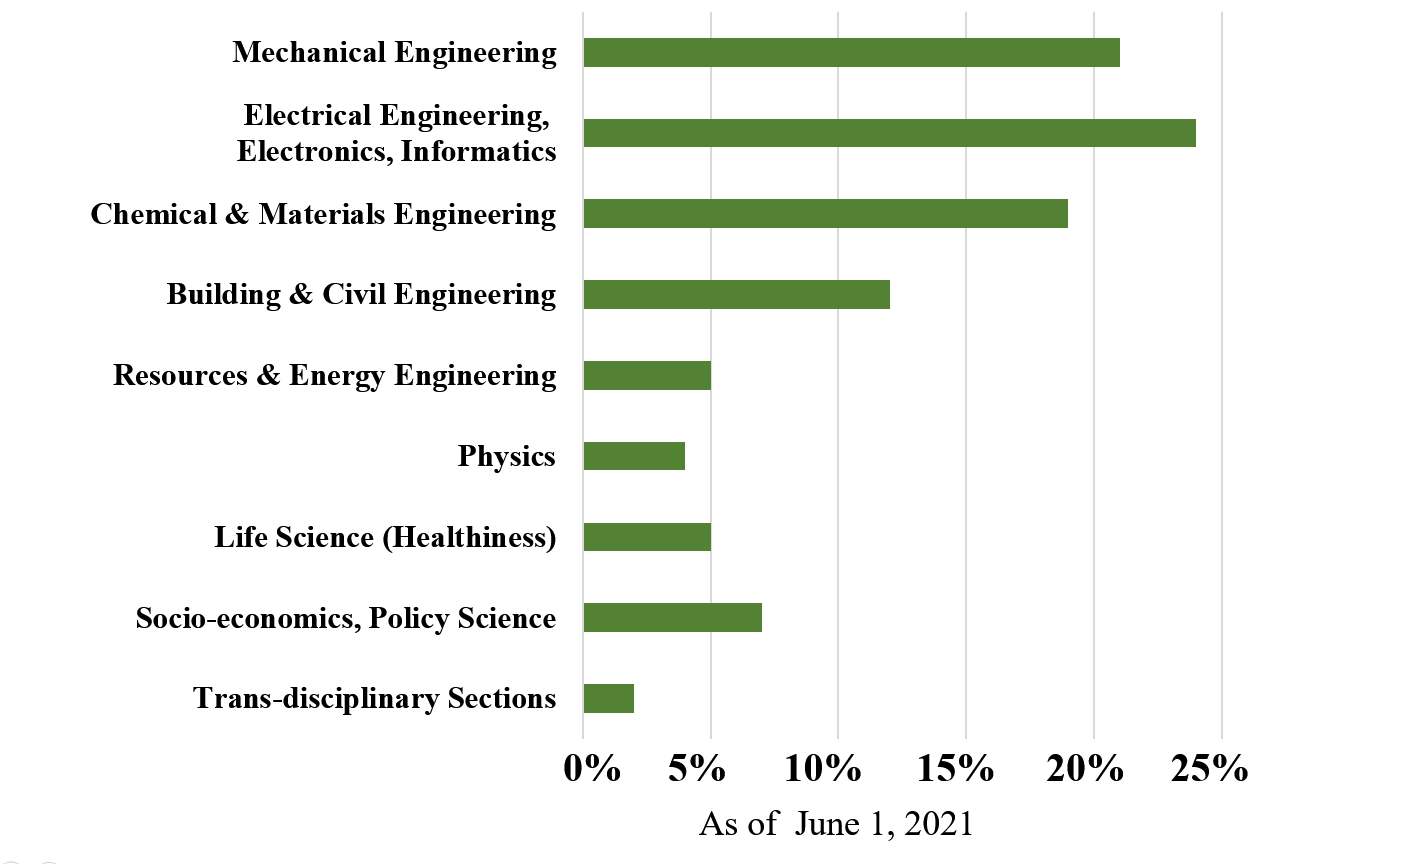 **Specialties // Mechanical Engineering / Electrical Engineering, Electronics, Informatics / Chemical & Materials Engineering / Building & Civil Engineering / Resources & Energy Engineering / Physics / Life Science (Healthiness) / Socio-economics, Policy Science / Trans-disciplinary Sections **